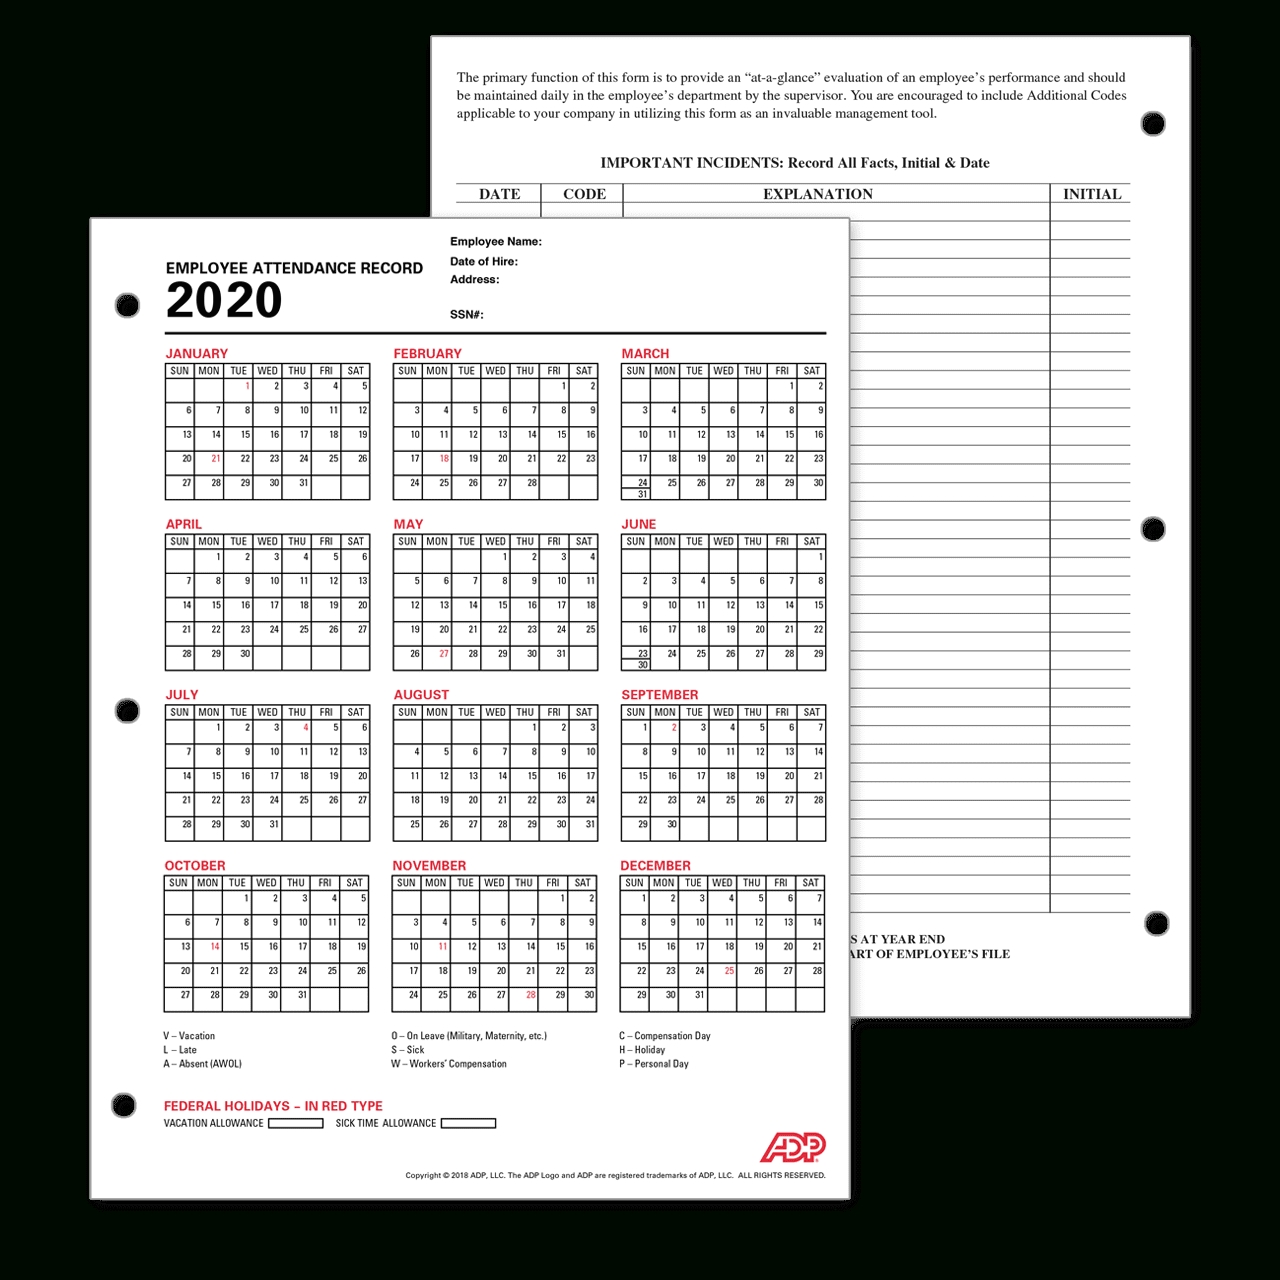 Adp Employee Attendance Record / Calendar with regard to Free 2020 Employee Attendance Calendar